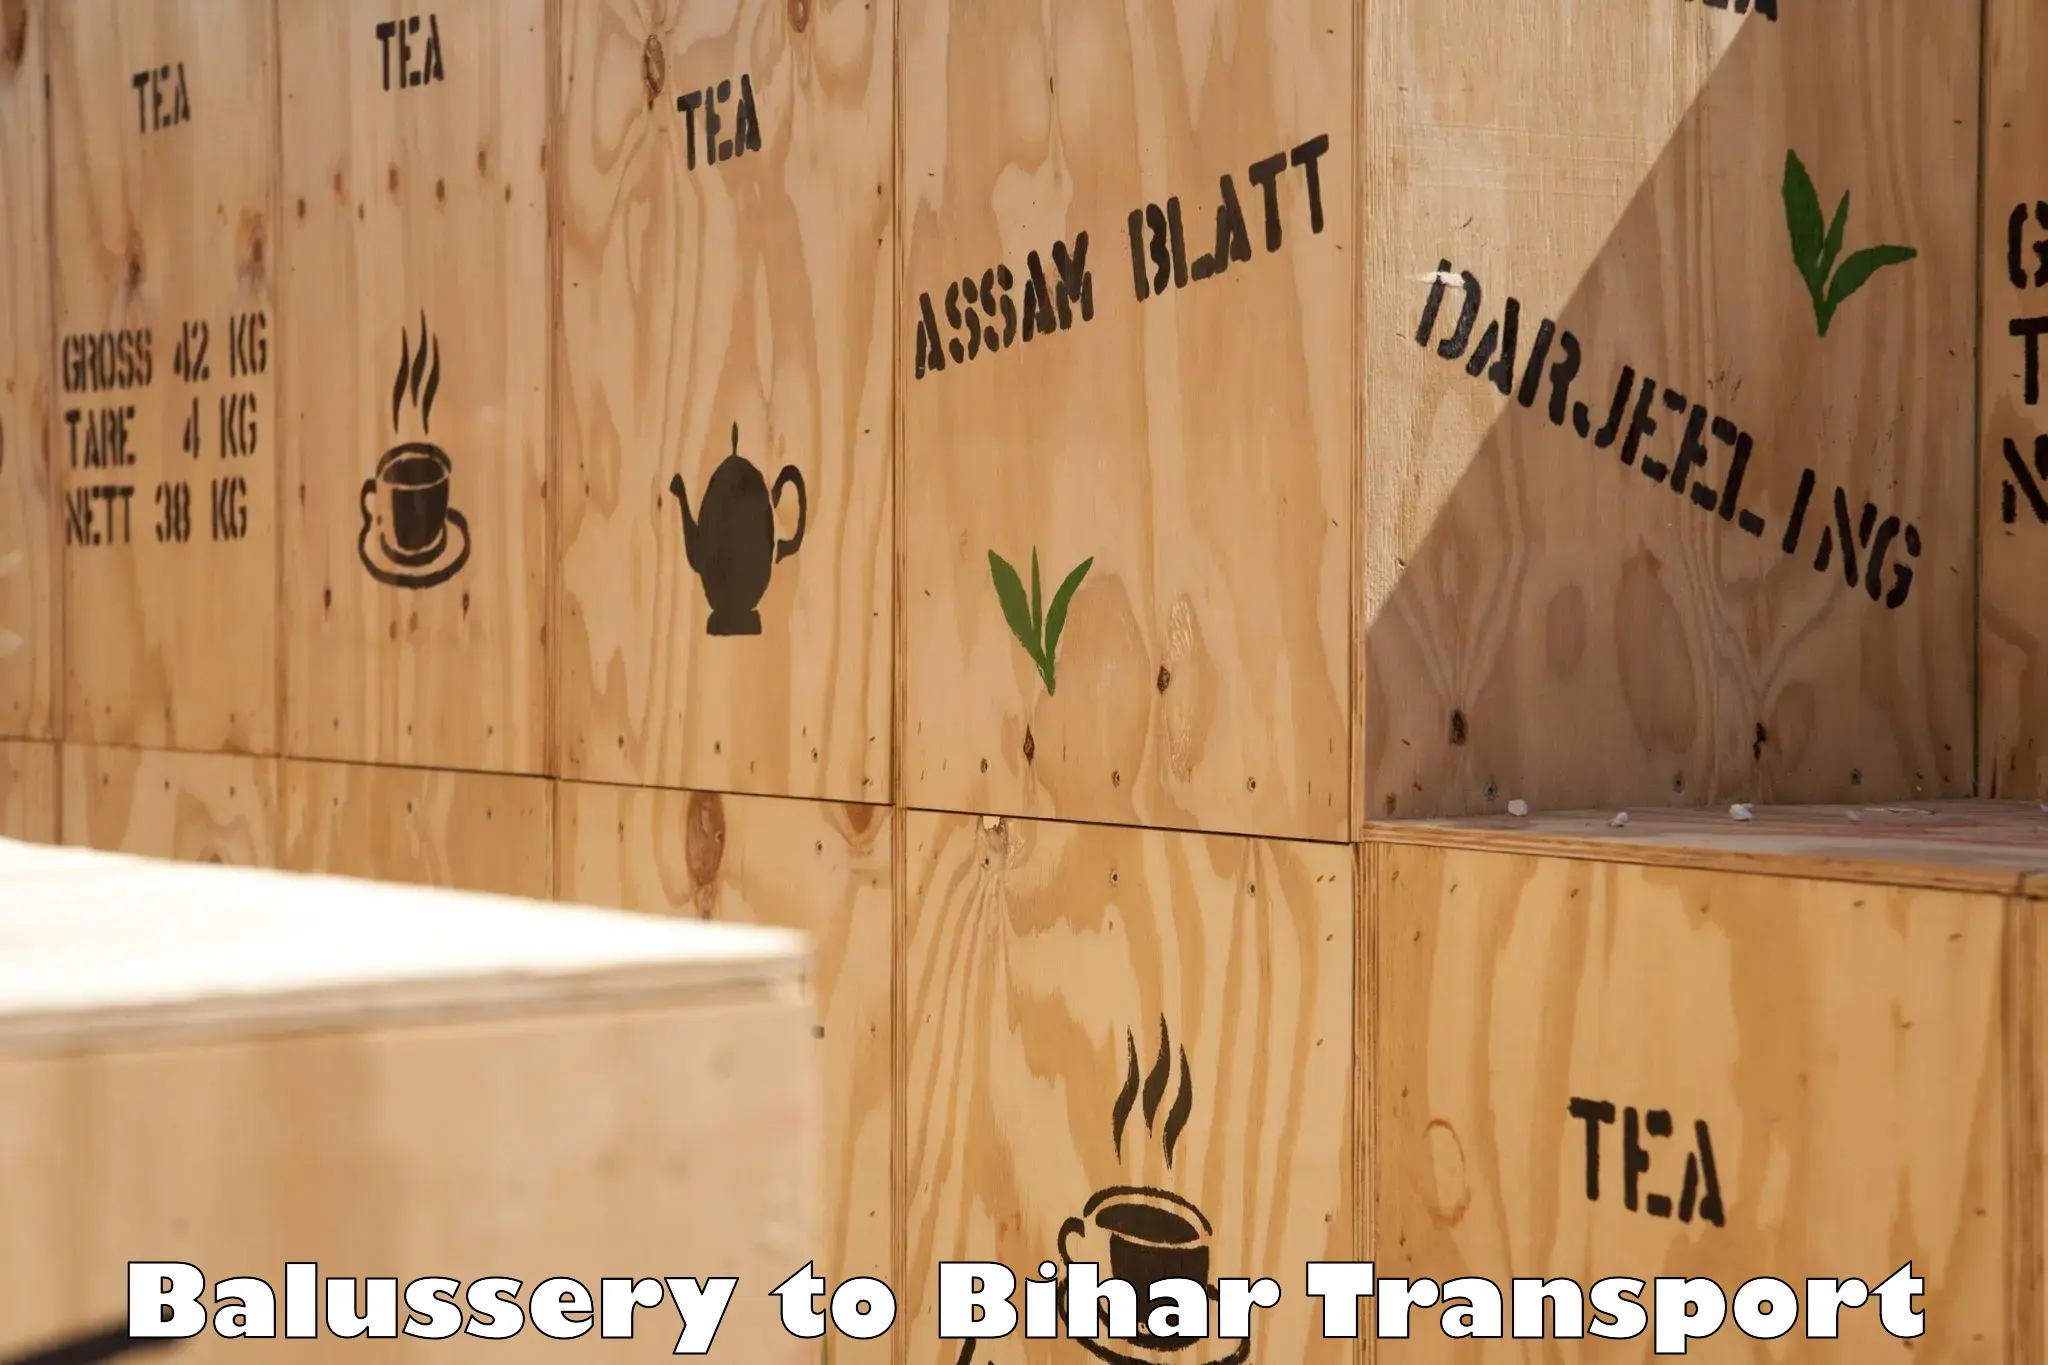 Daily transport service Balussery to Bihta